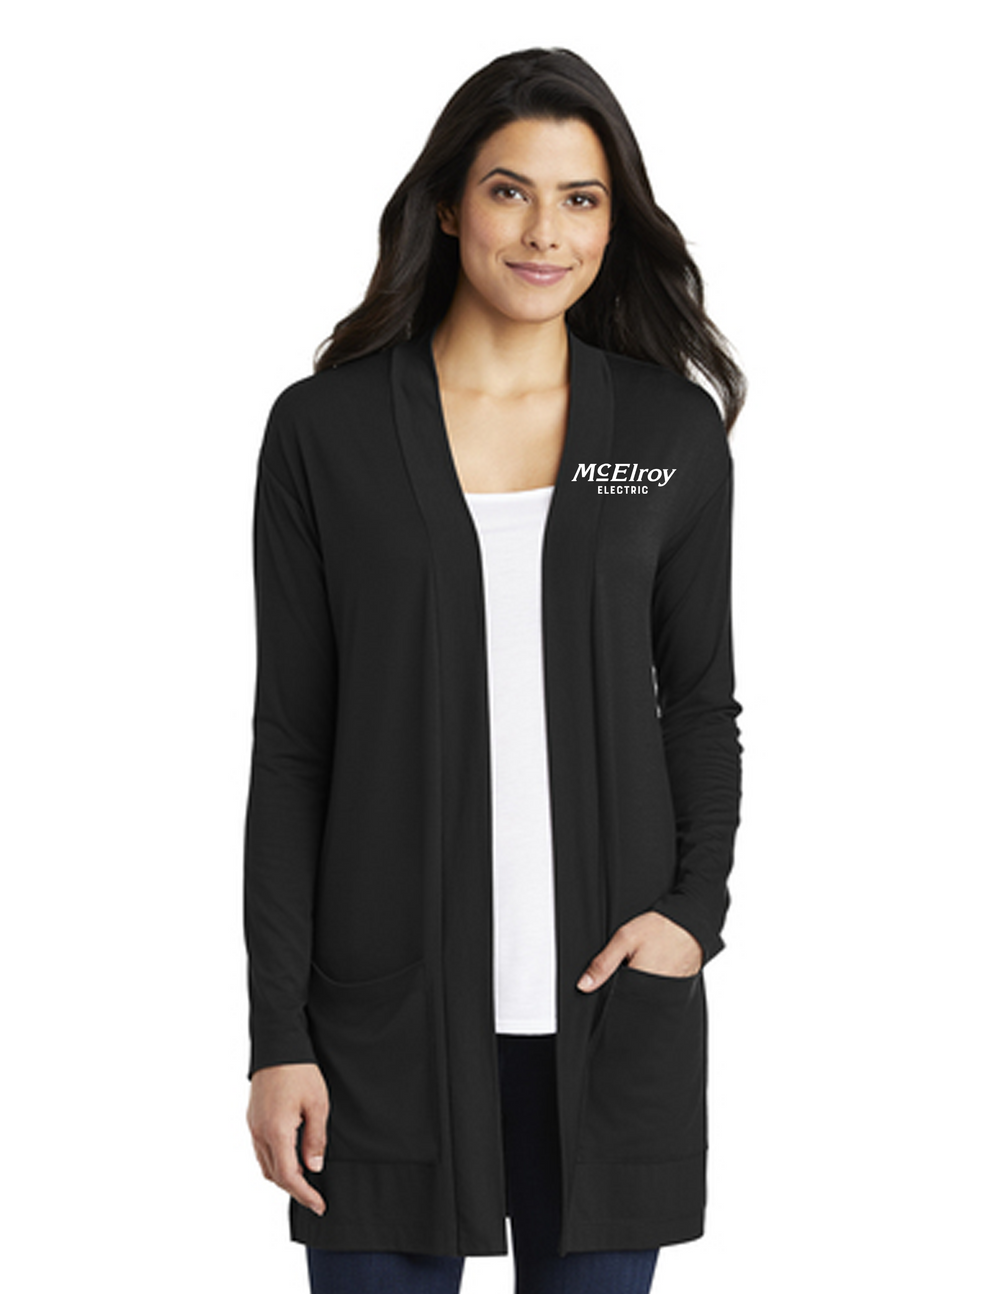 McElroy Electric - Port Authority Ladies Concept Long Pocket Cardigan - LK5434